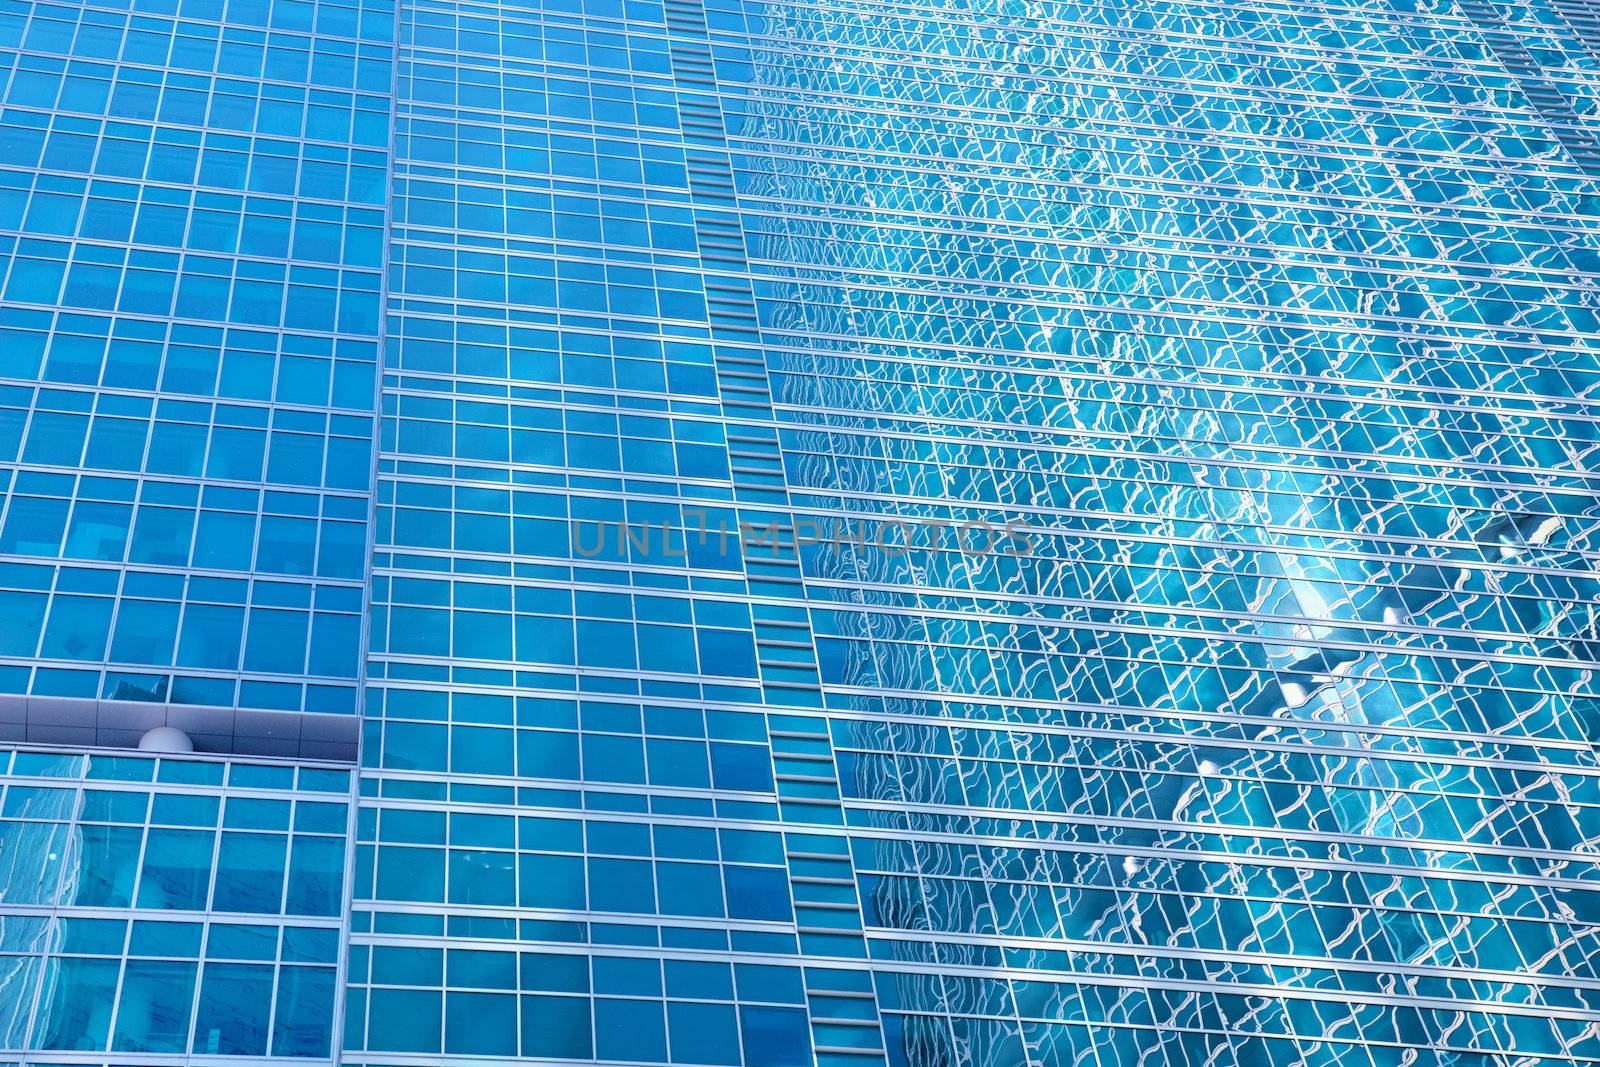 The walls and windows of a skyscraper - an abstract urban background